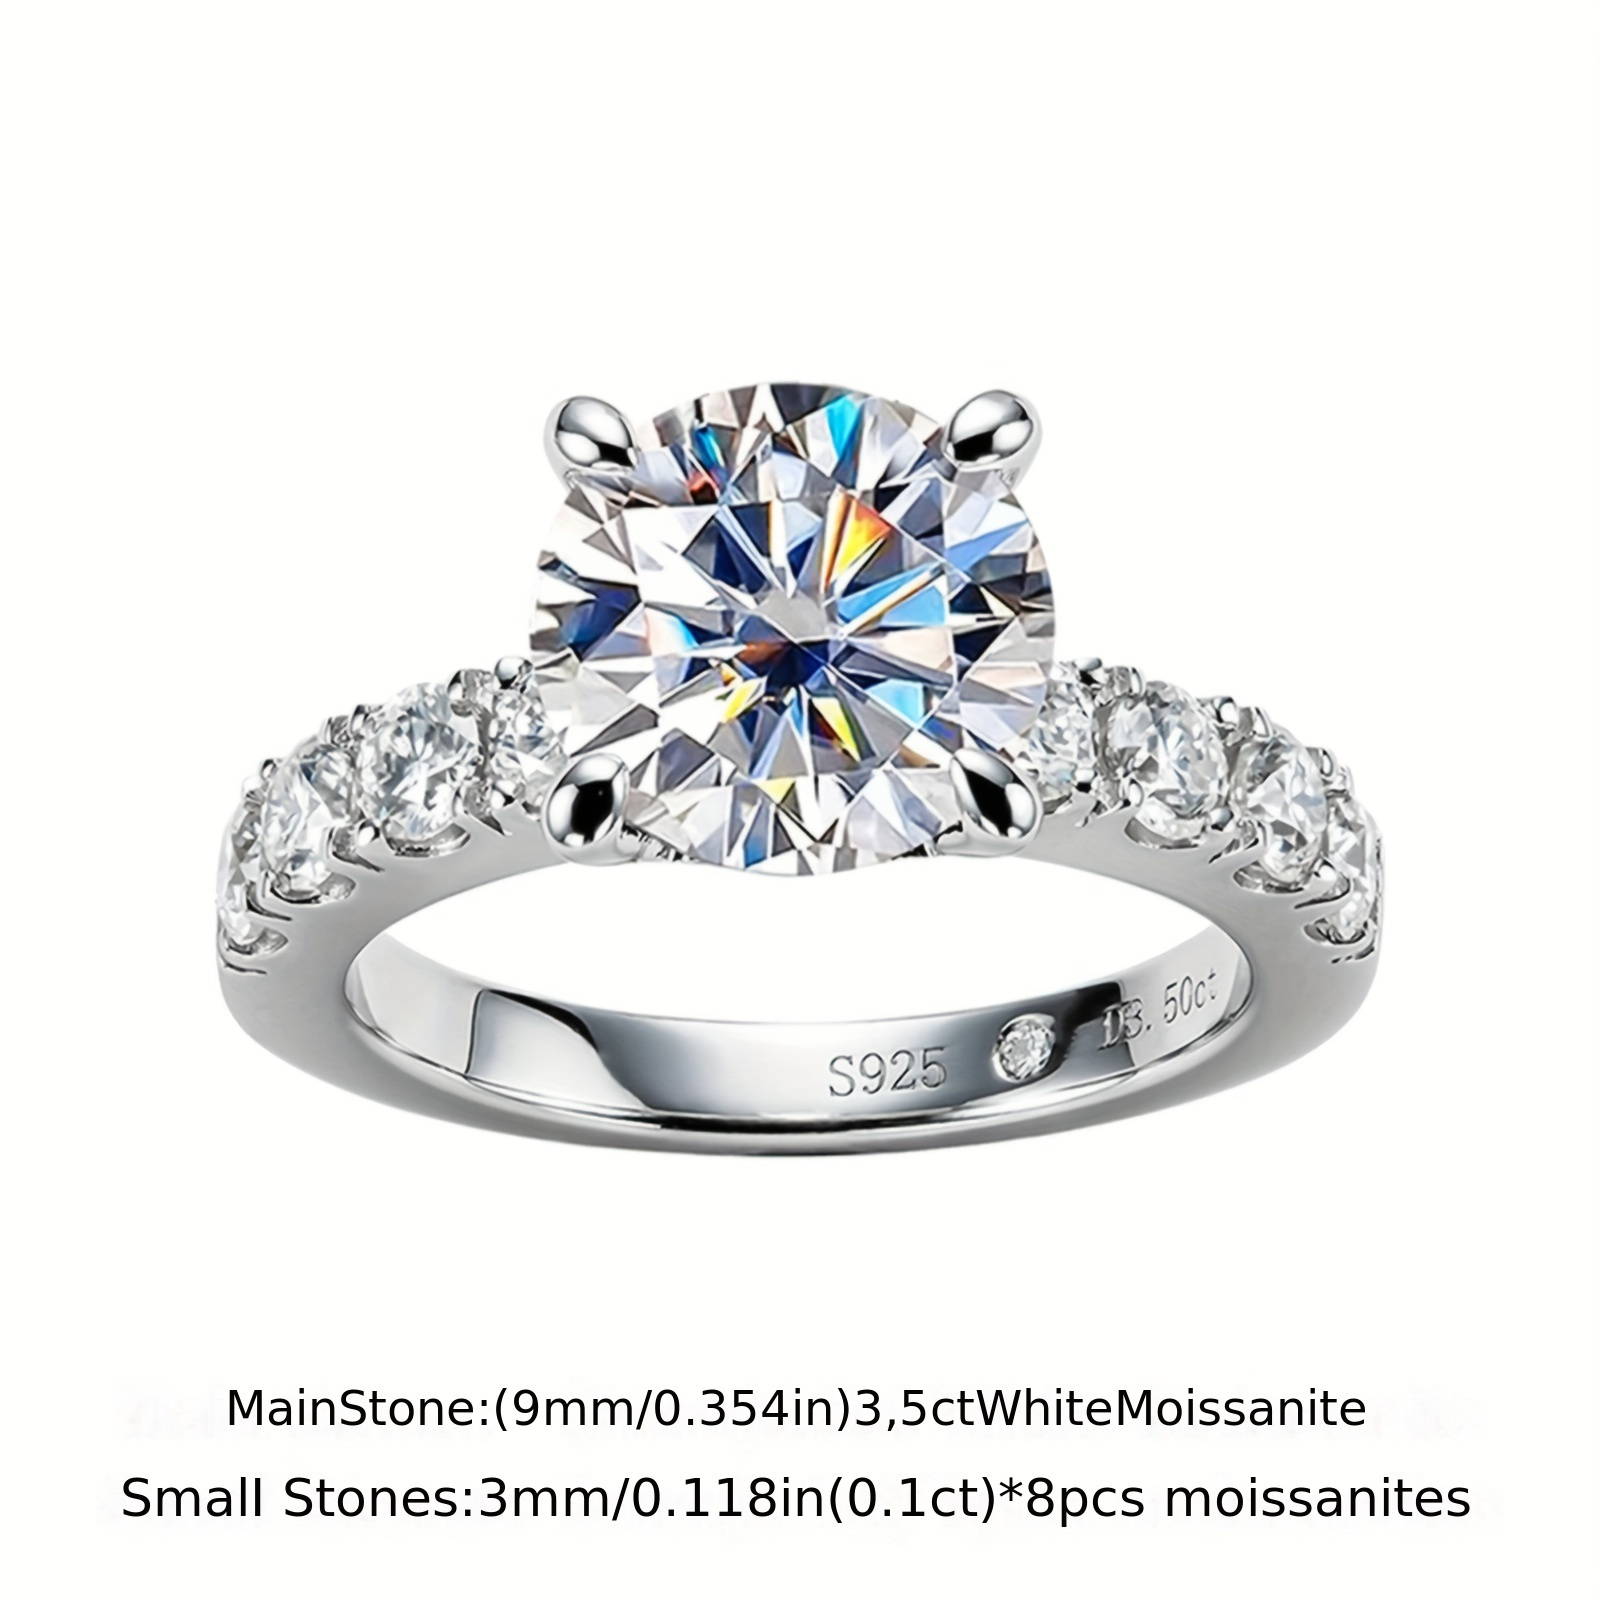 1pcs 4 3cttw d color moissanite engagement rings 925 sterling silver plated wedding band rings